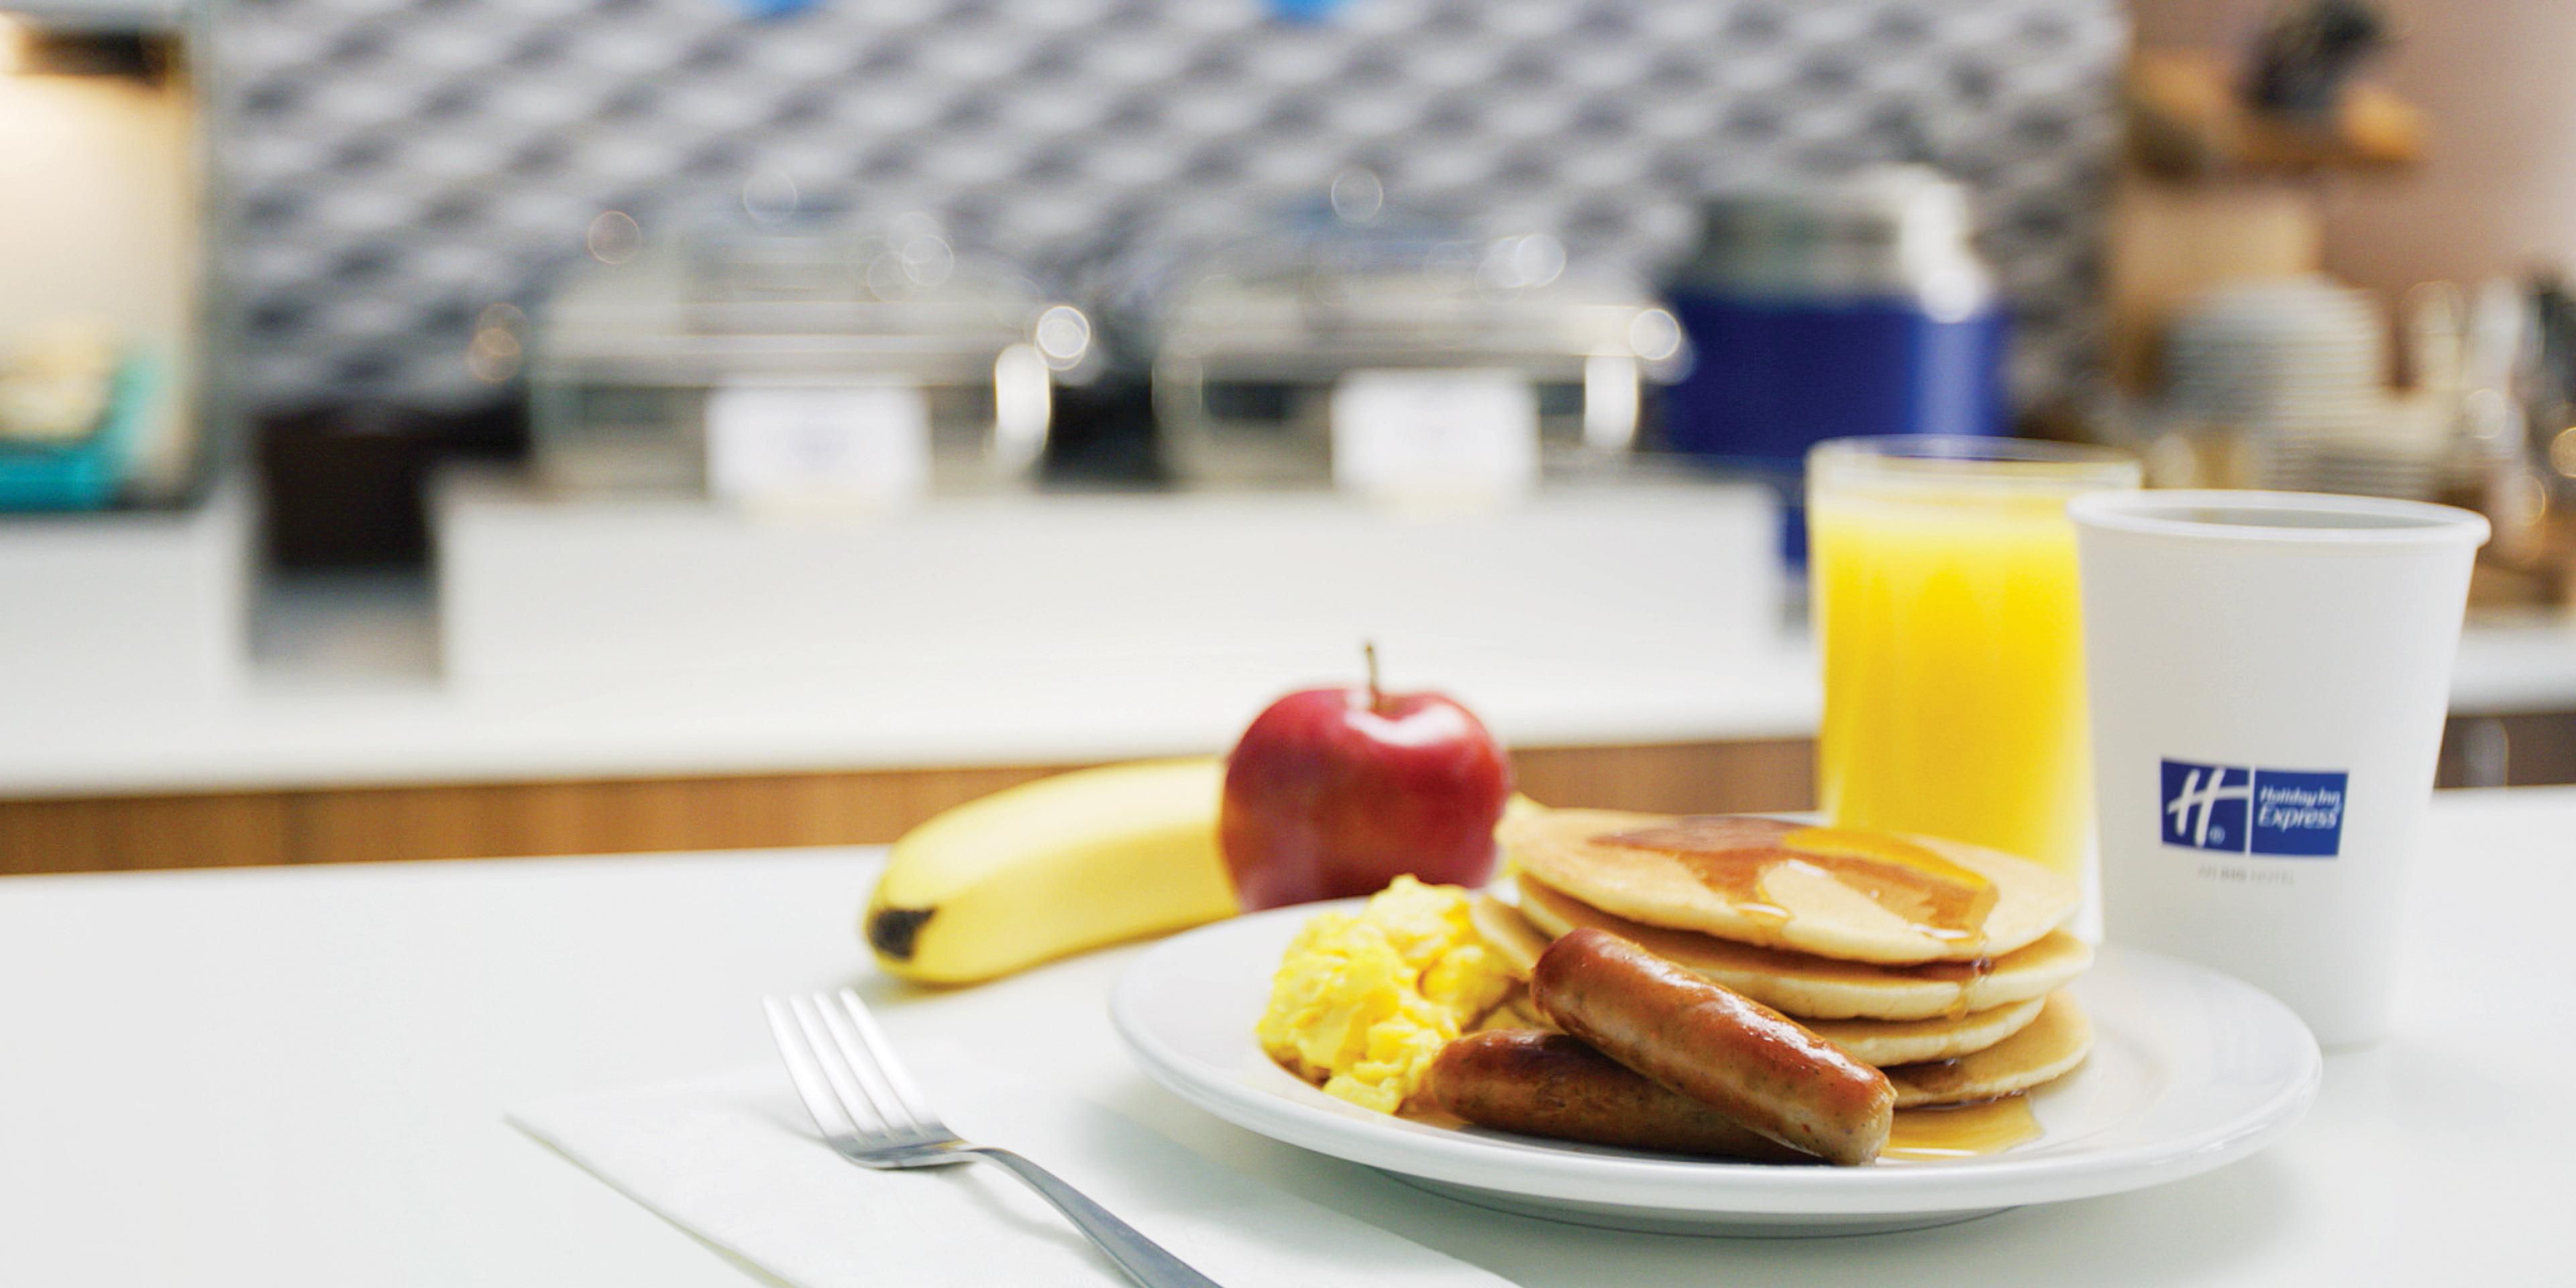 Start your day off right with our complimentary Express Start hot buffet breakfast. Each morning our guests can enjoy a delicious variety of cold items as well as a rotating menu of hearty items such as bacon, sausage, scrambled eggs, omelettes, pancakes, and lighter options like oatmeal, fruit, yogurt, and assorted breads - including gluten free! 